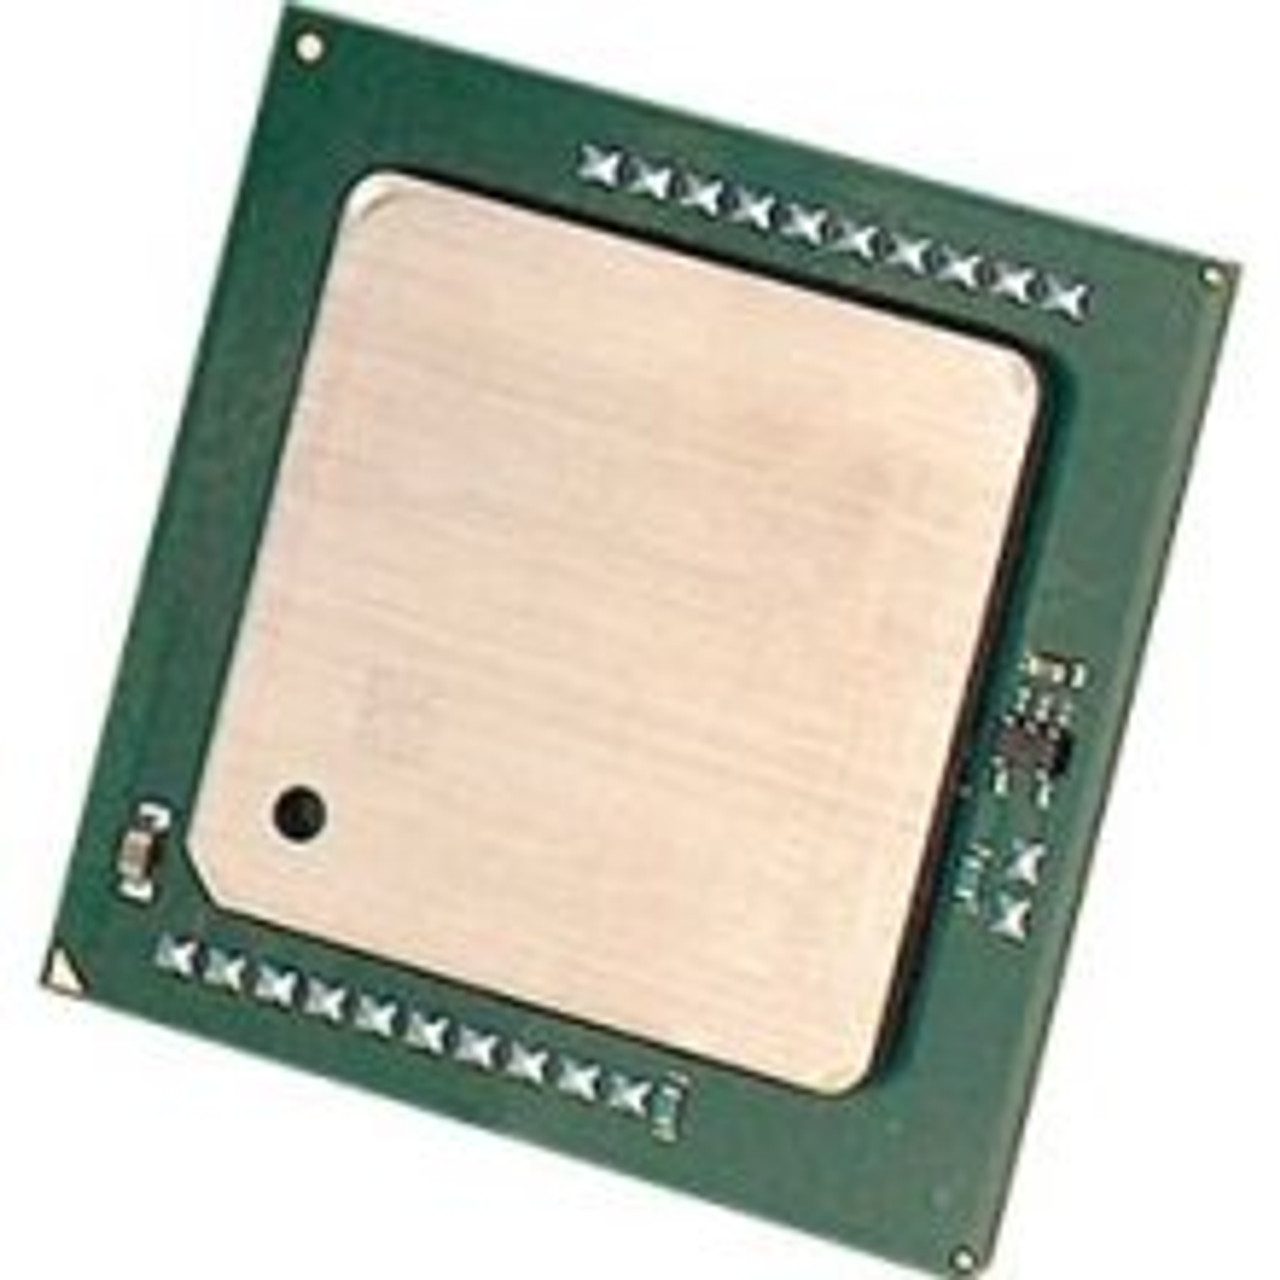 SPS-Proc Magny Cours 6132HE 8c 2.2 Ghz - 633546-001